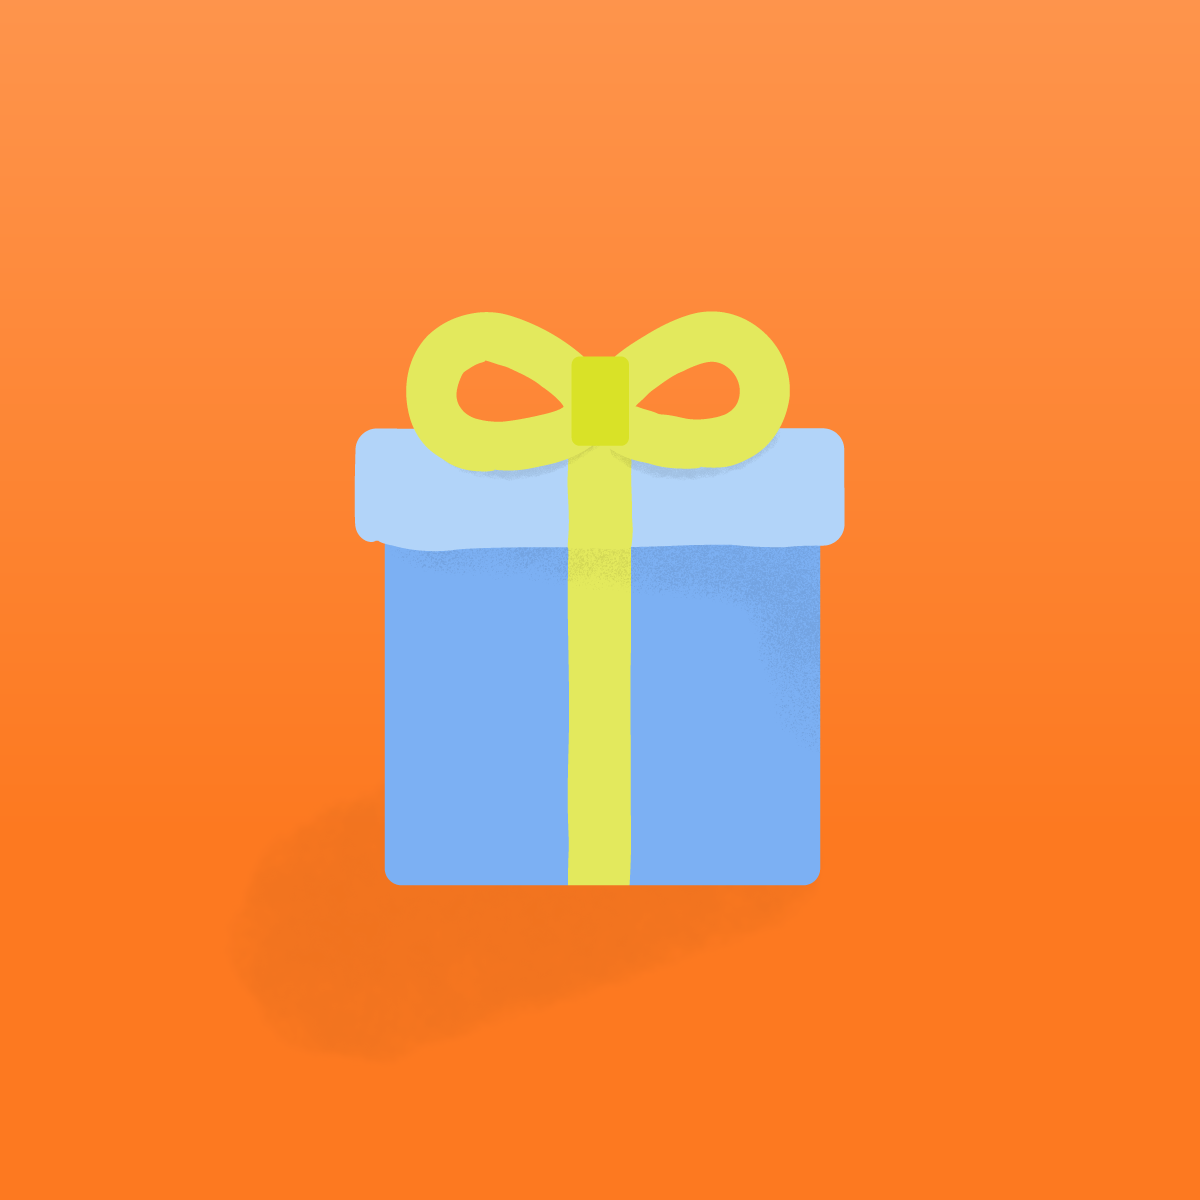 graphic illustration of a blue present with a yellow bow on an orange background